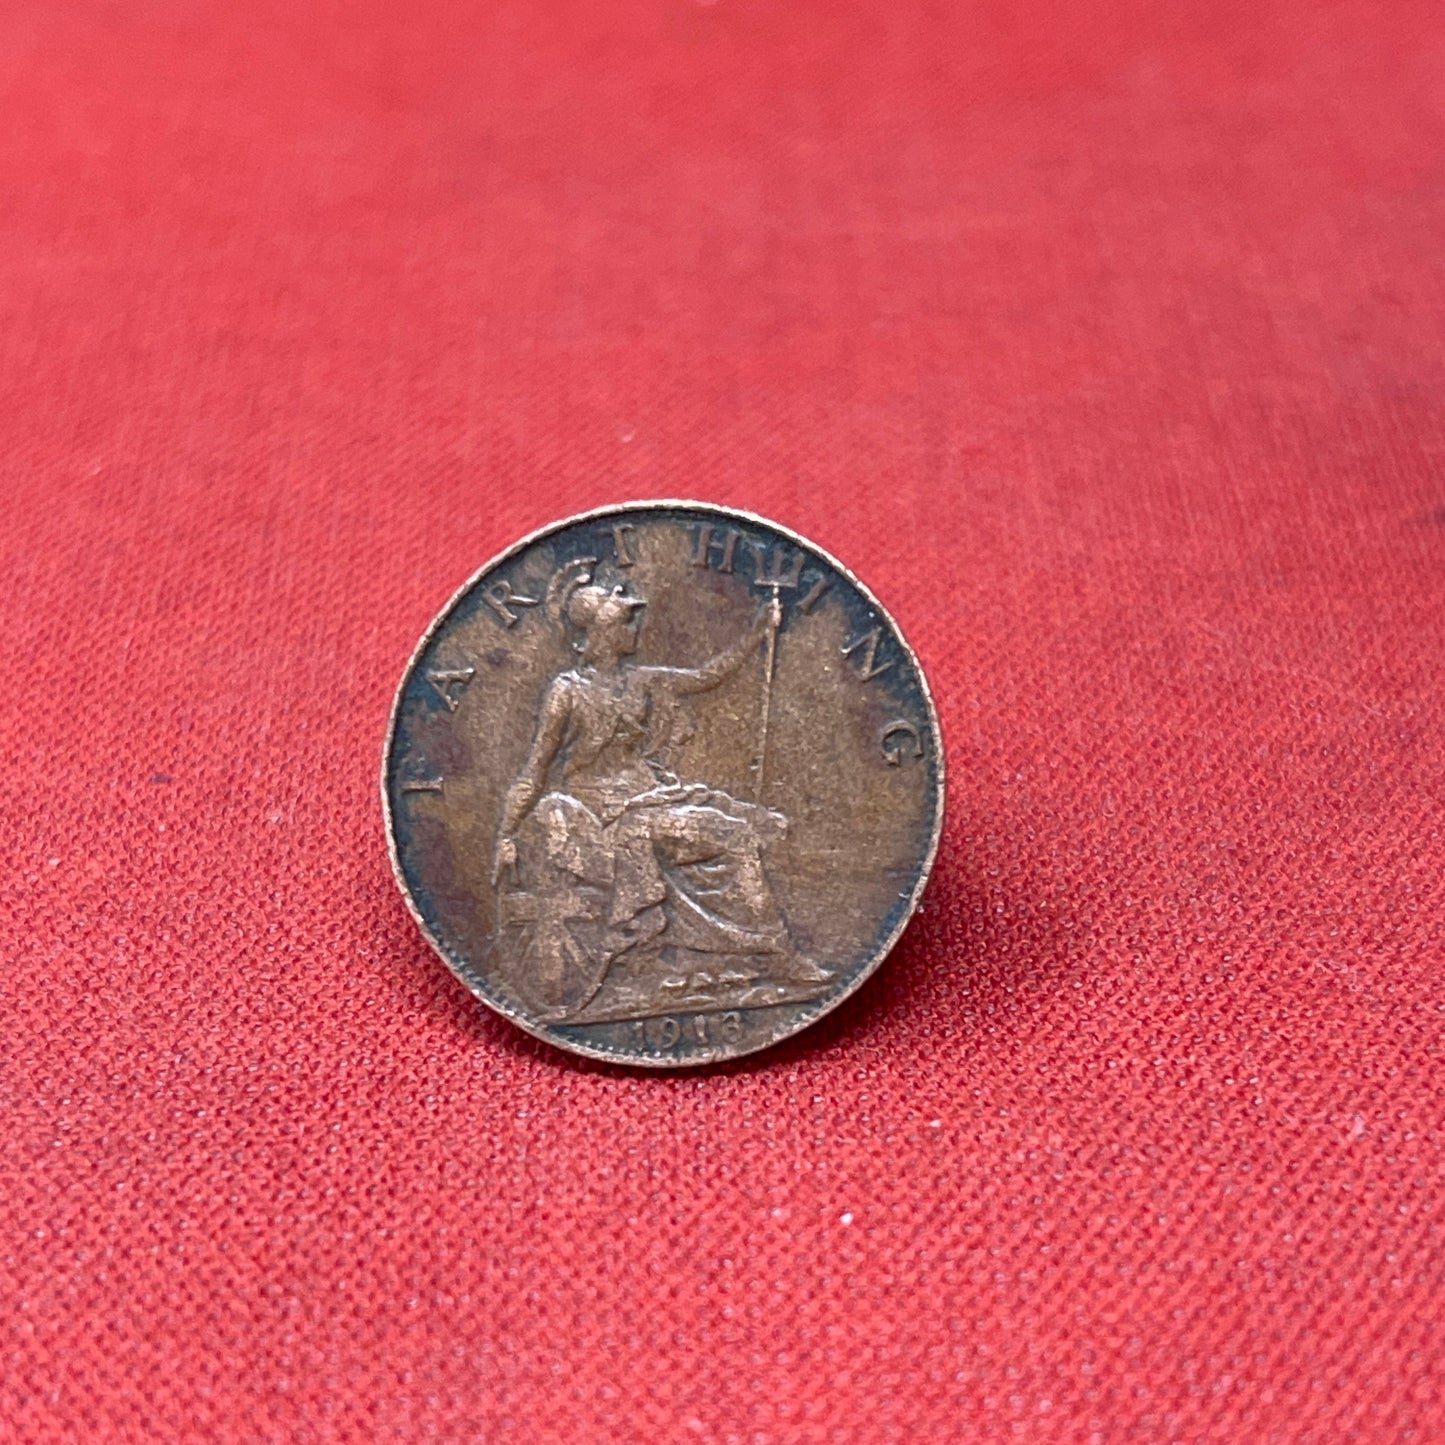 Discover the King George V Farthing, minted from 1911 to 1936. Featuring the iconic Britannia design and King George V's portrait, these historic bronze coins are perfect for collectors and history enthusiasts.